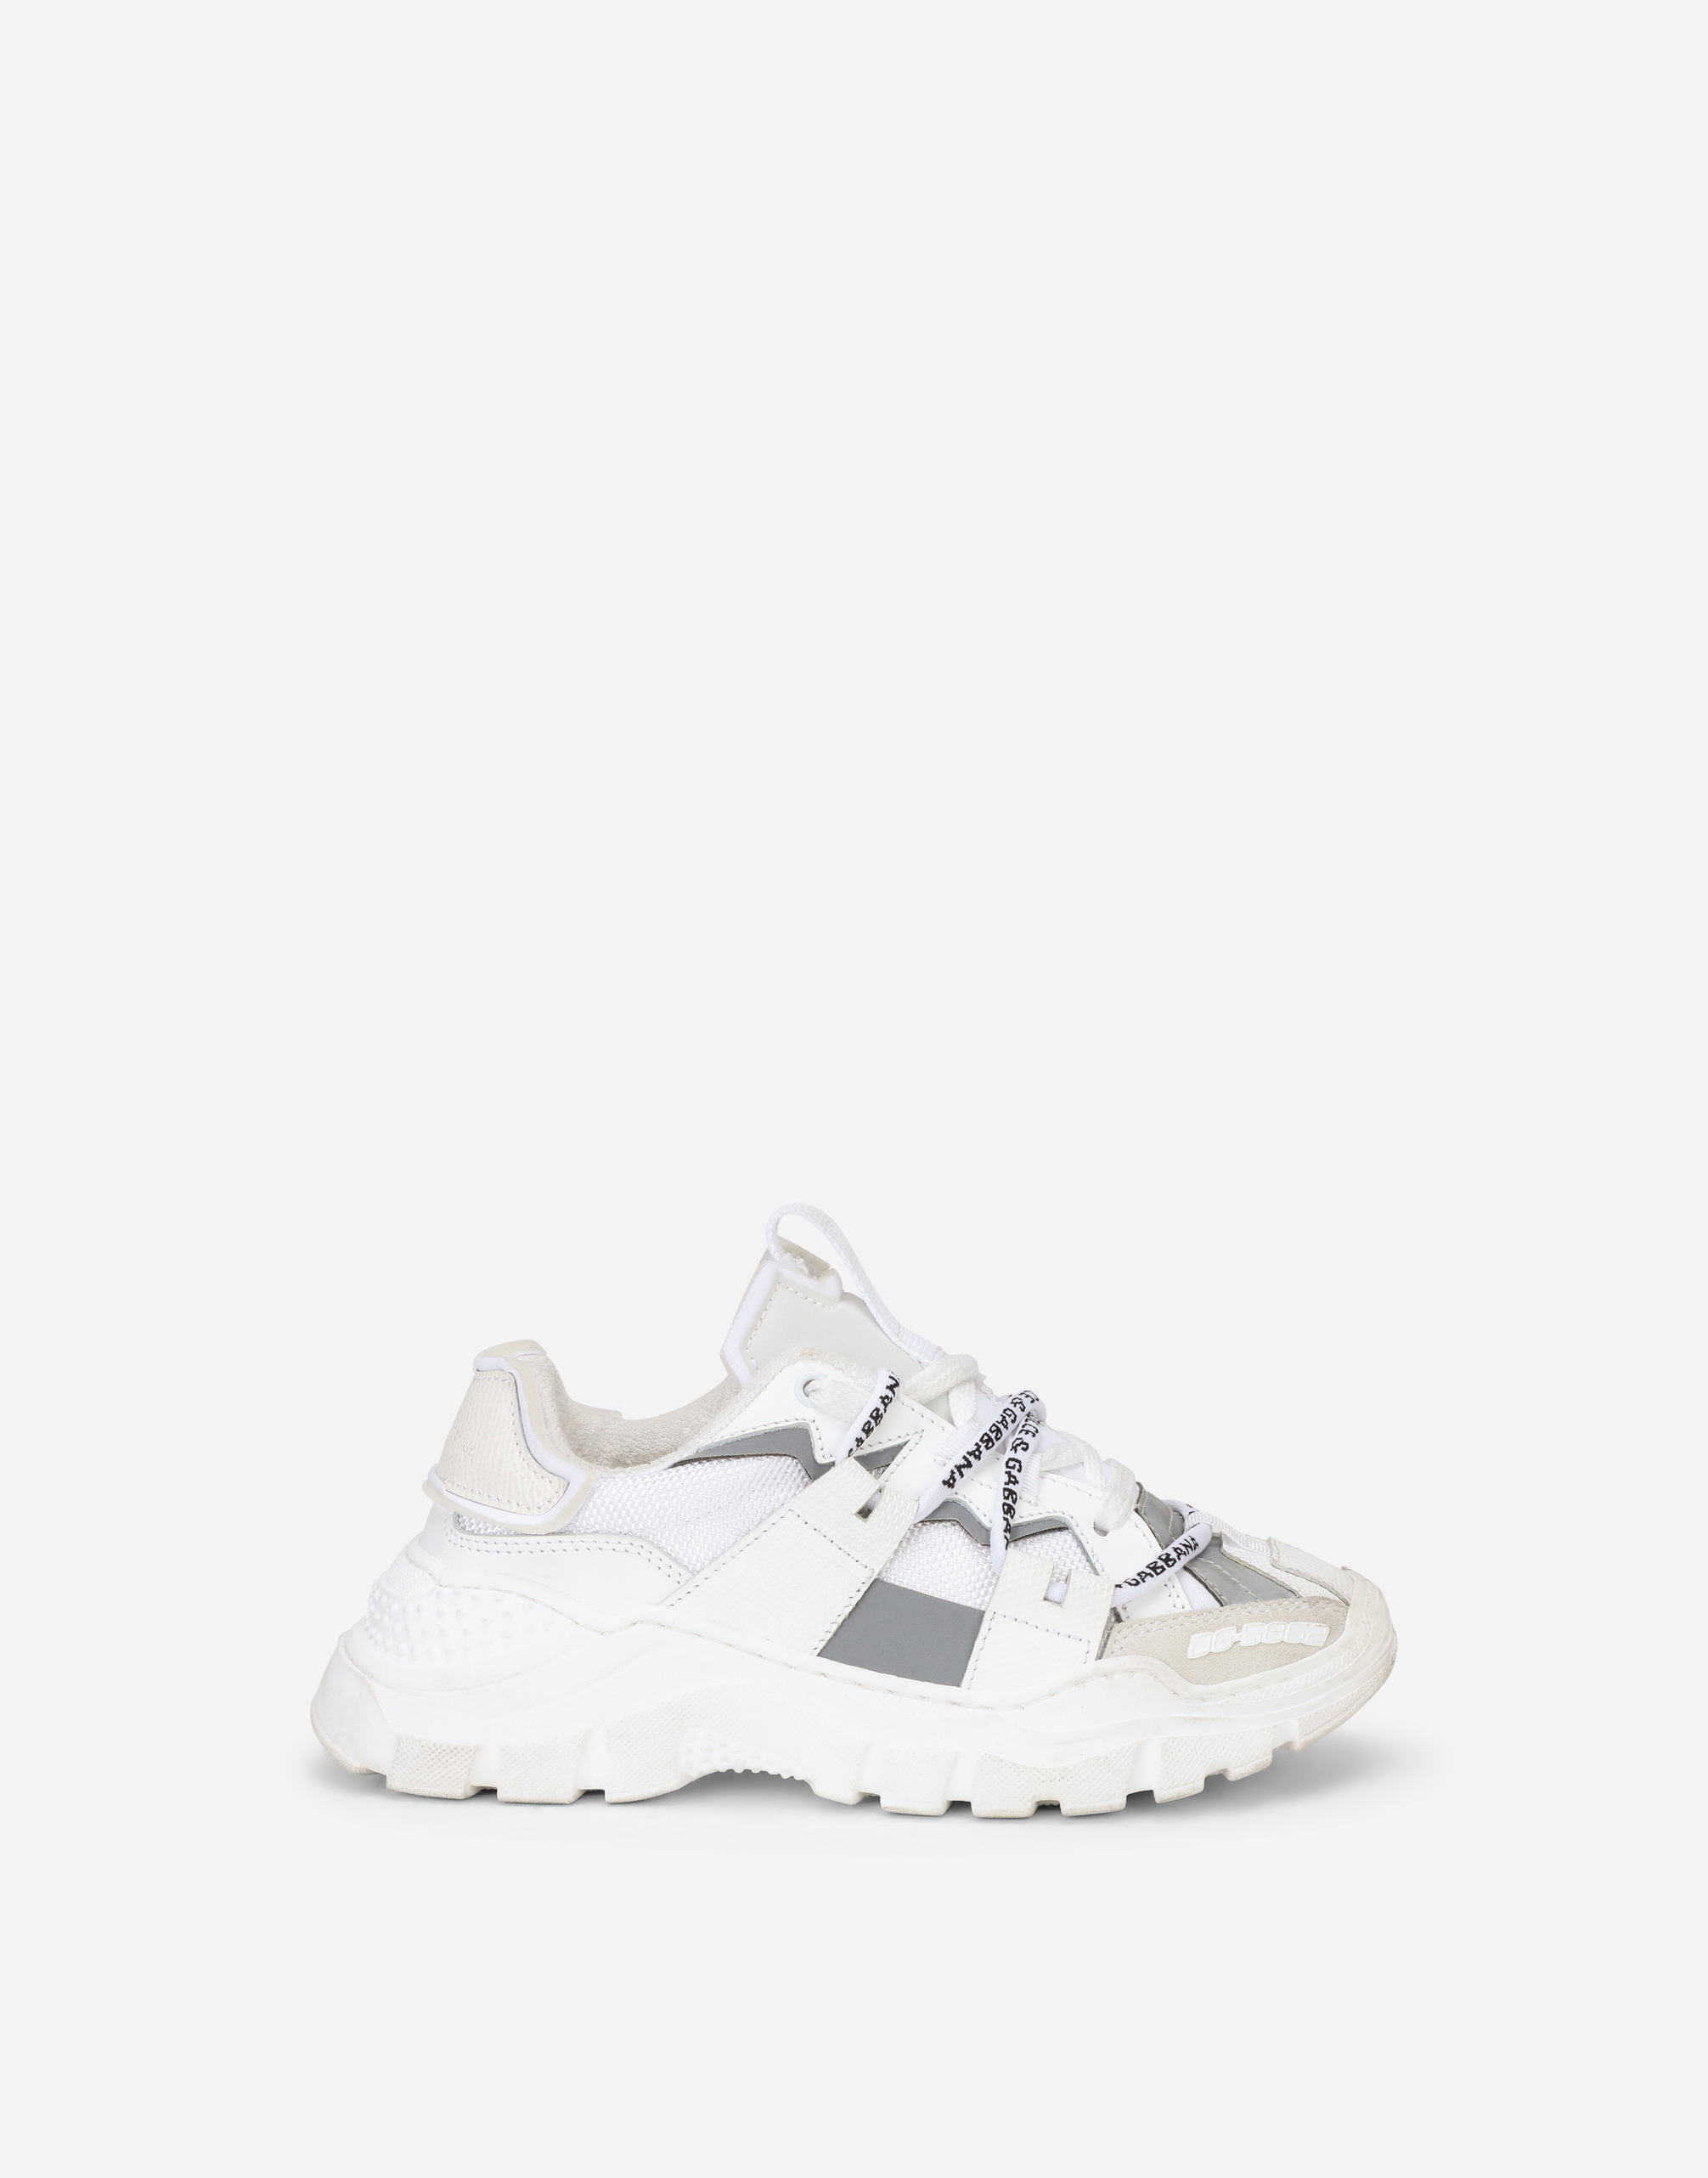 Nylon and calfskin Space sneakers in White/Silver